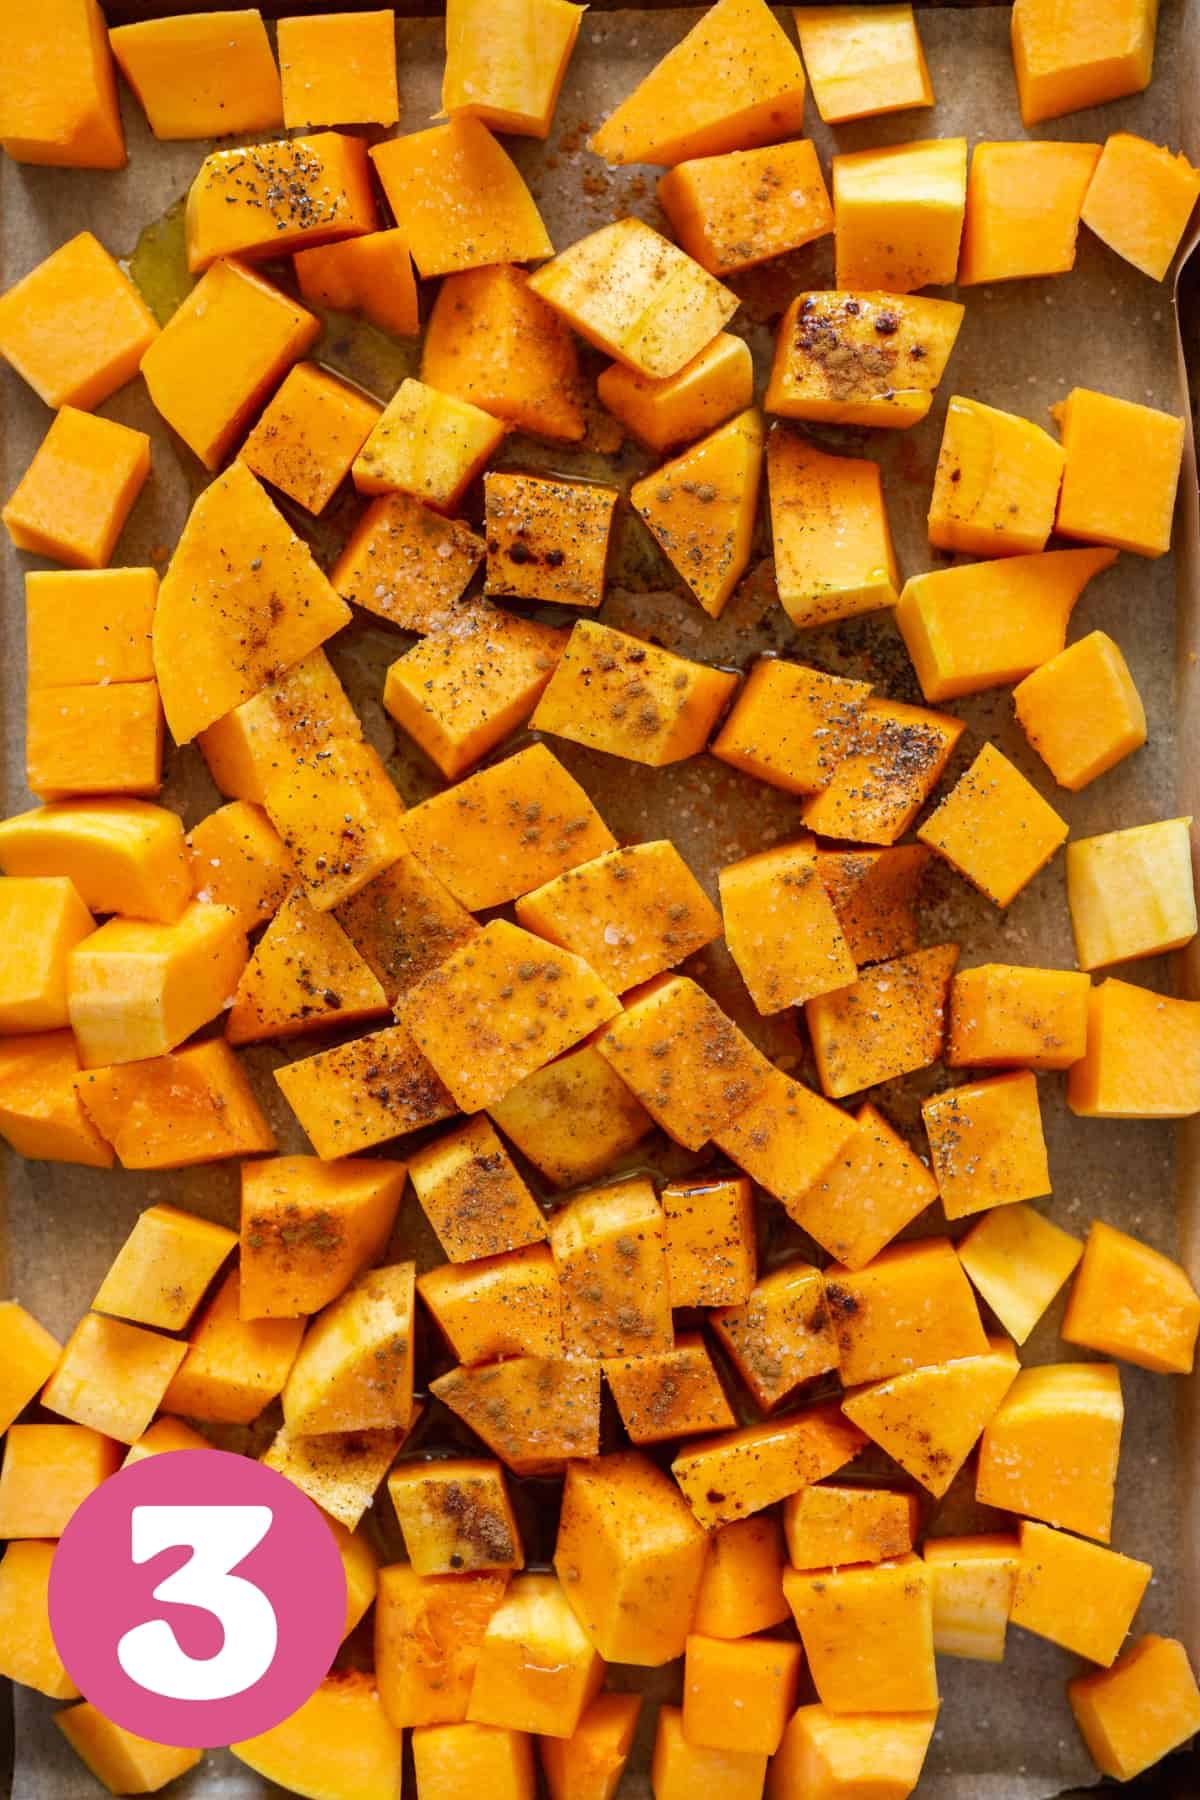 cubed butternut squash tossed in oils and seasonings on a tray